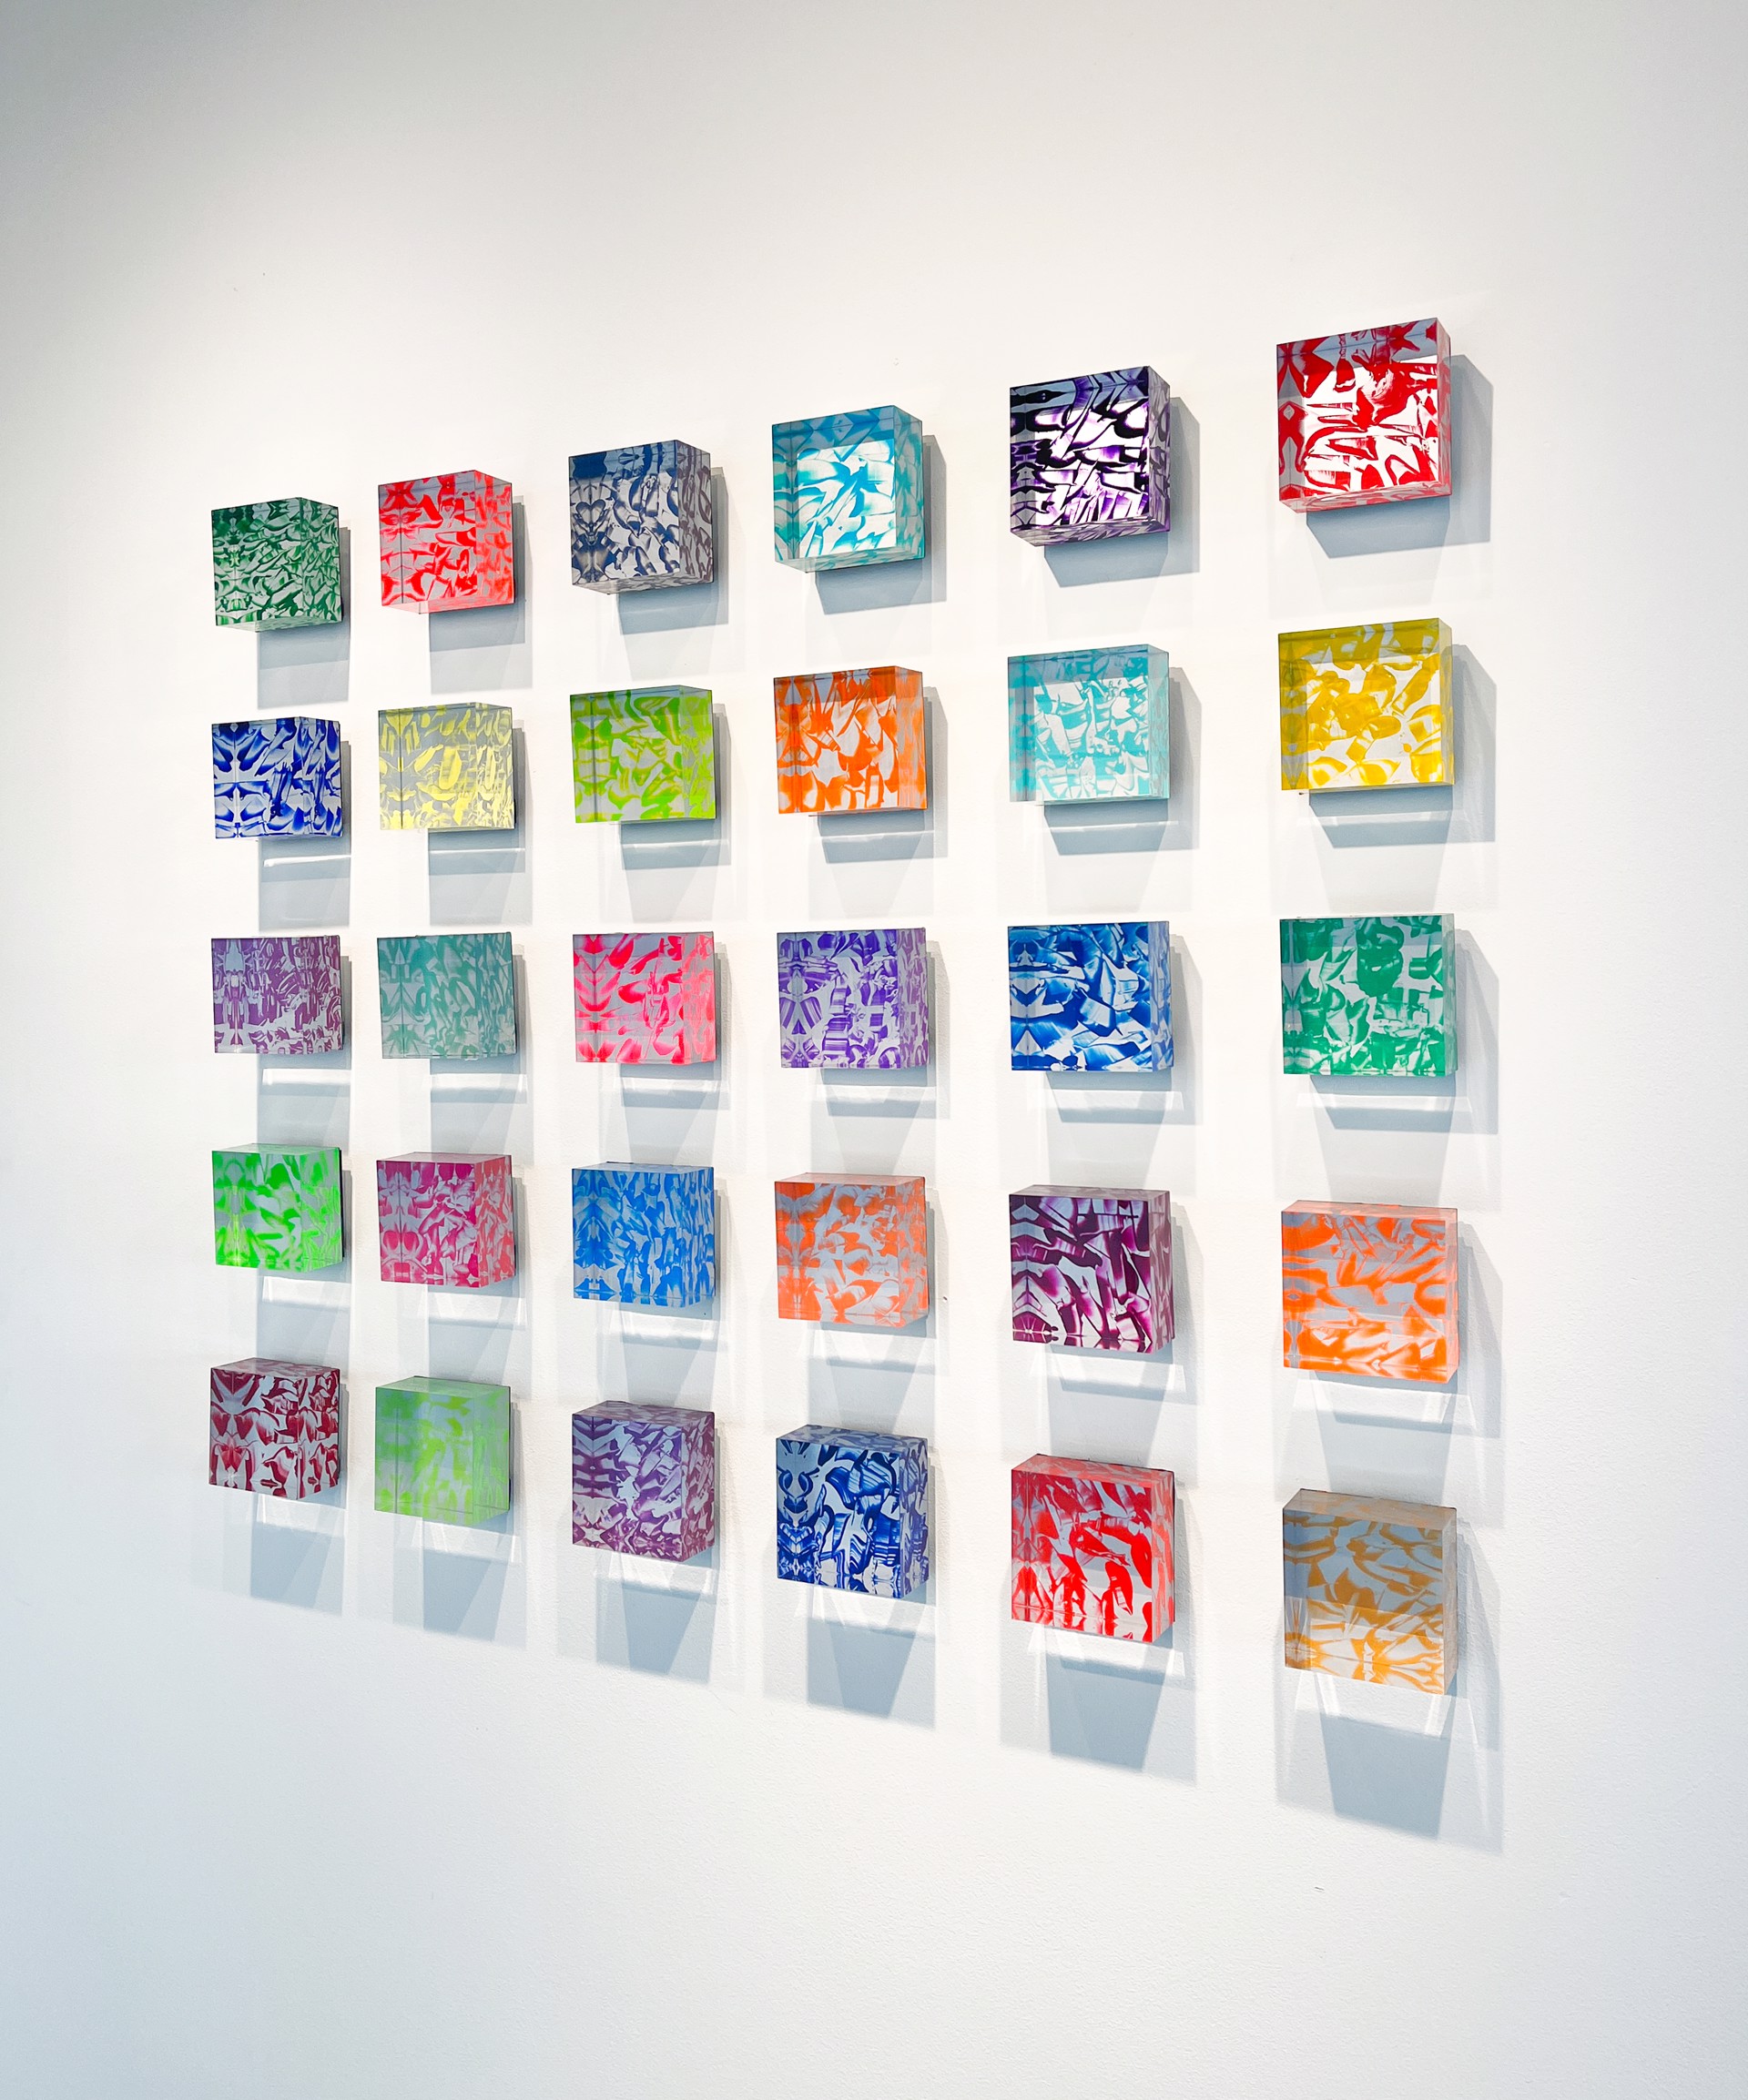 Acrylic Cube Installation - Abstract by Katherine Houston